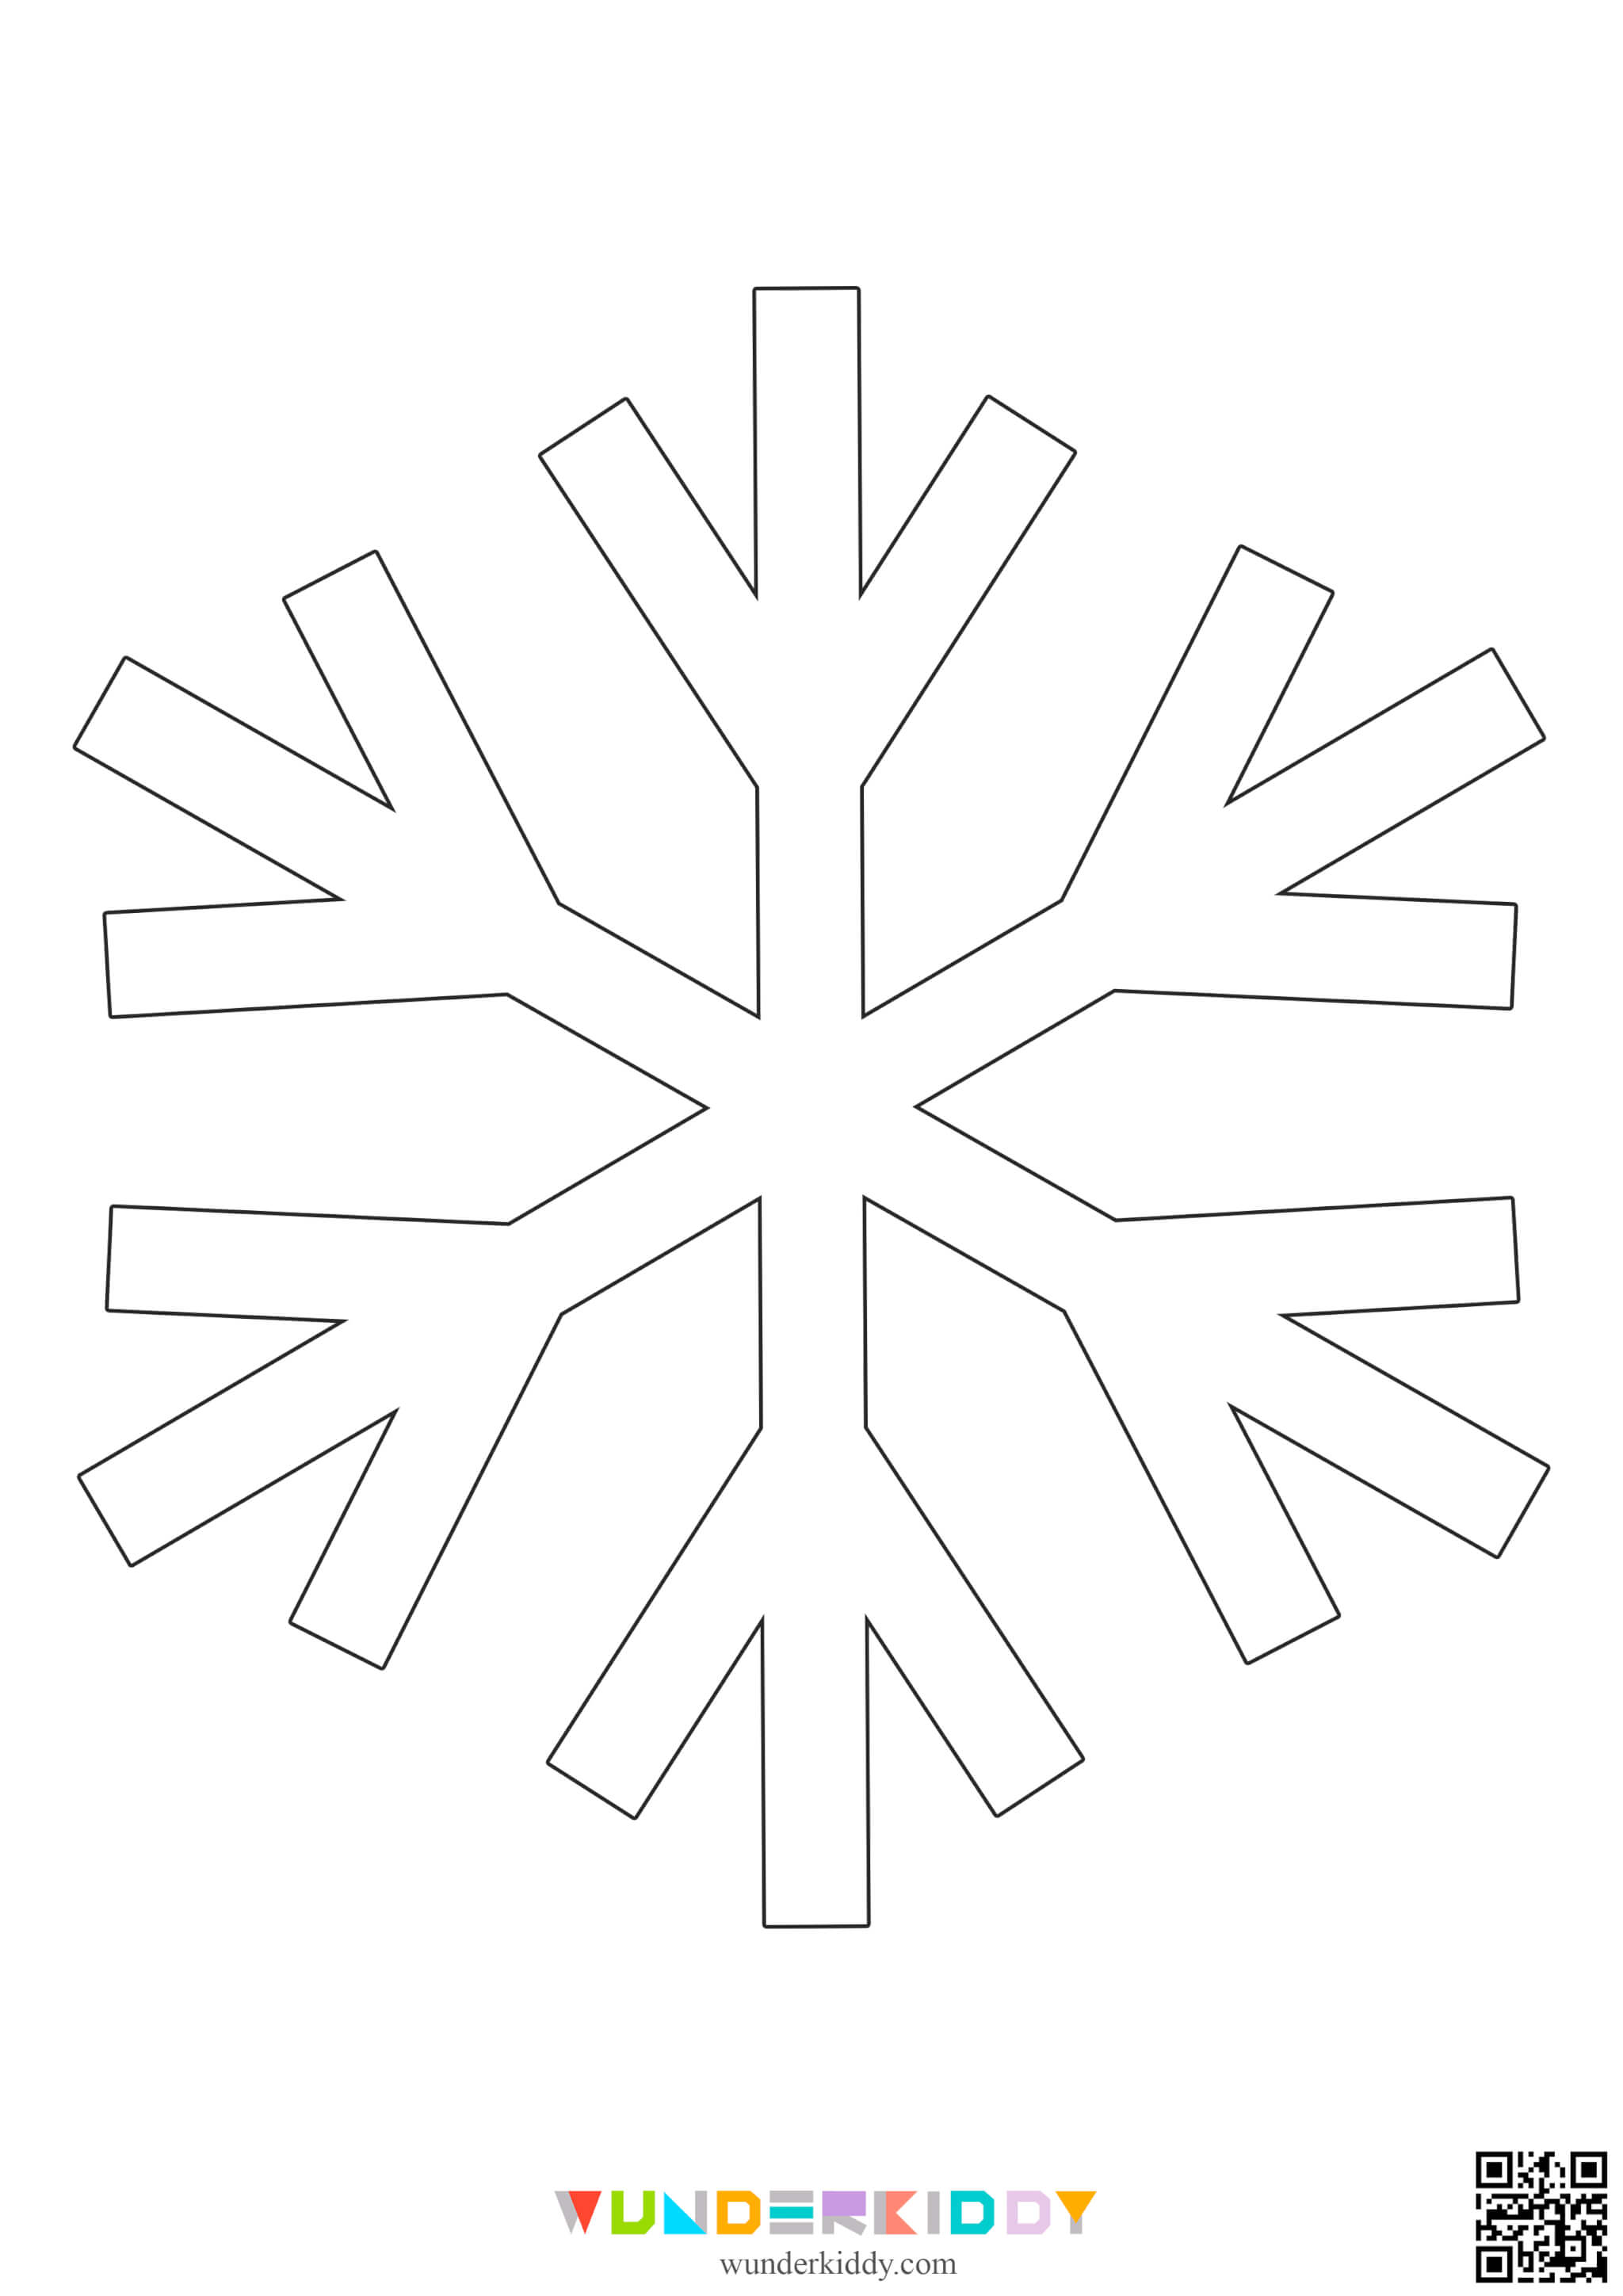 Snowflakes Template - Image 4